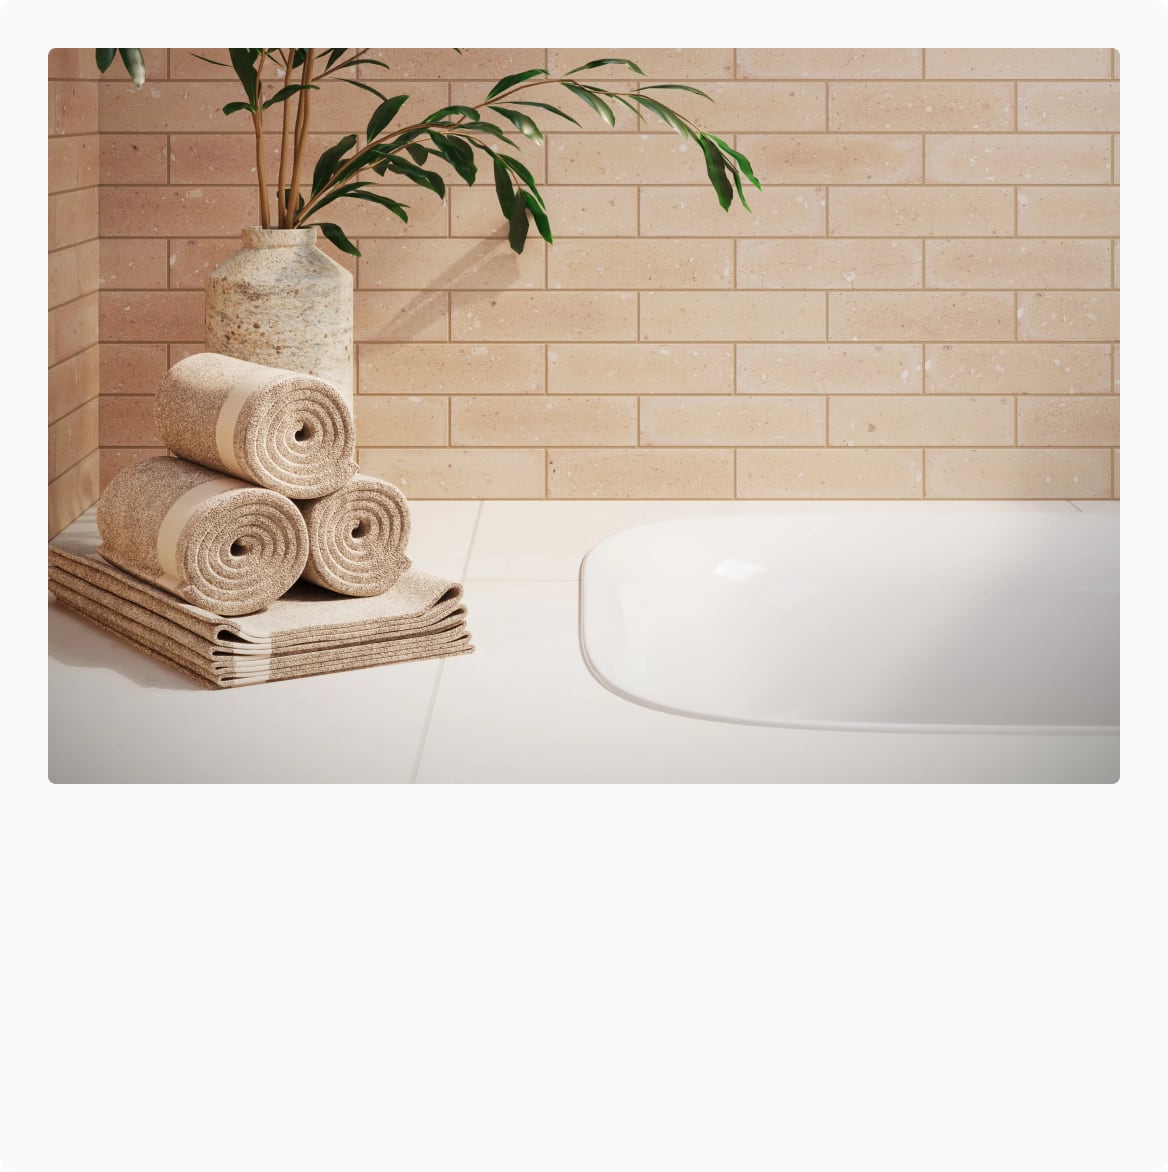 Cozy bathroom adorned with new tile arrivals, crafting an inviting retreat with the latest in tile sophistication.